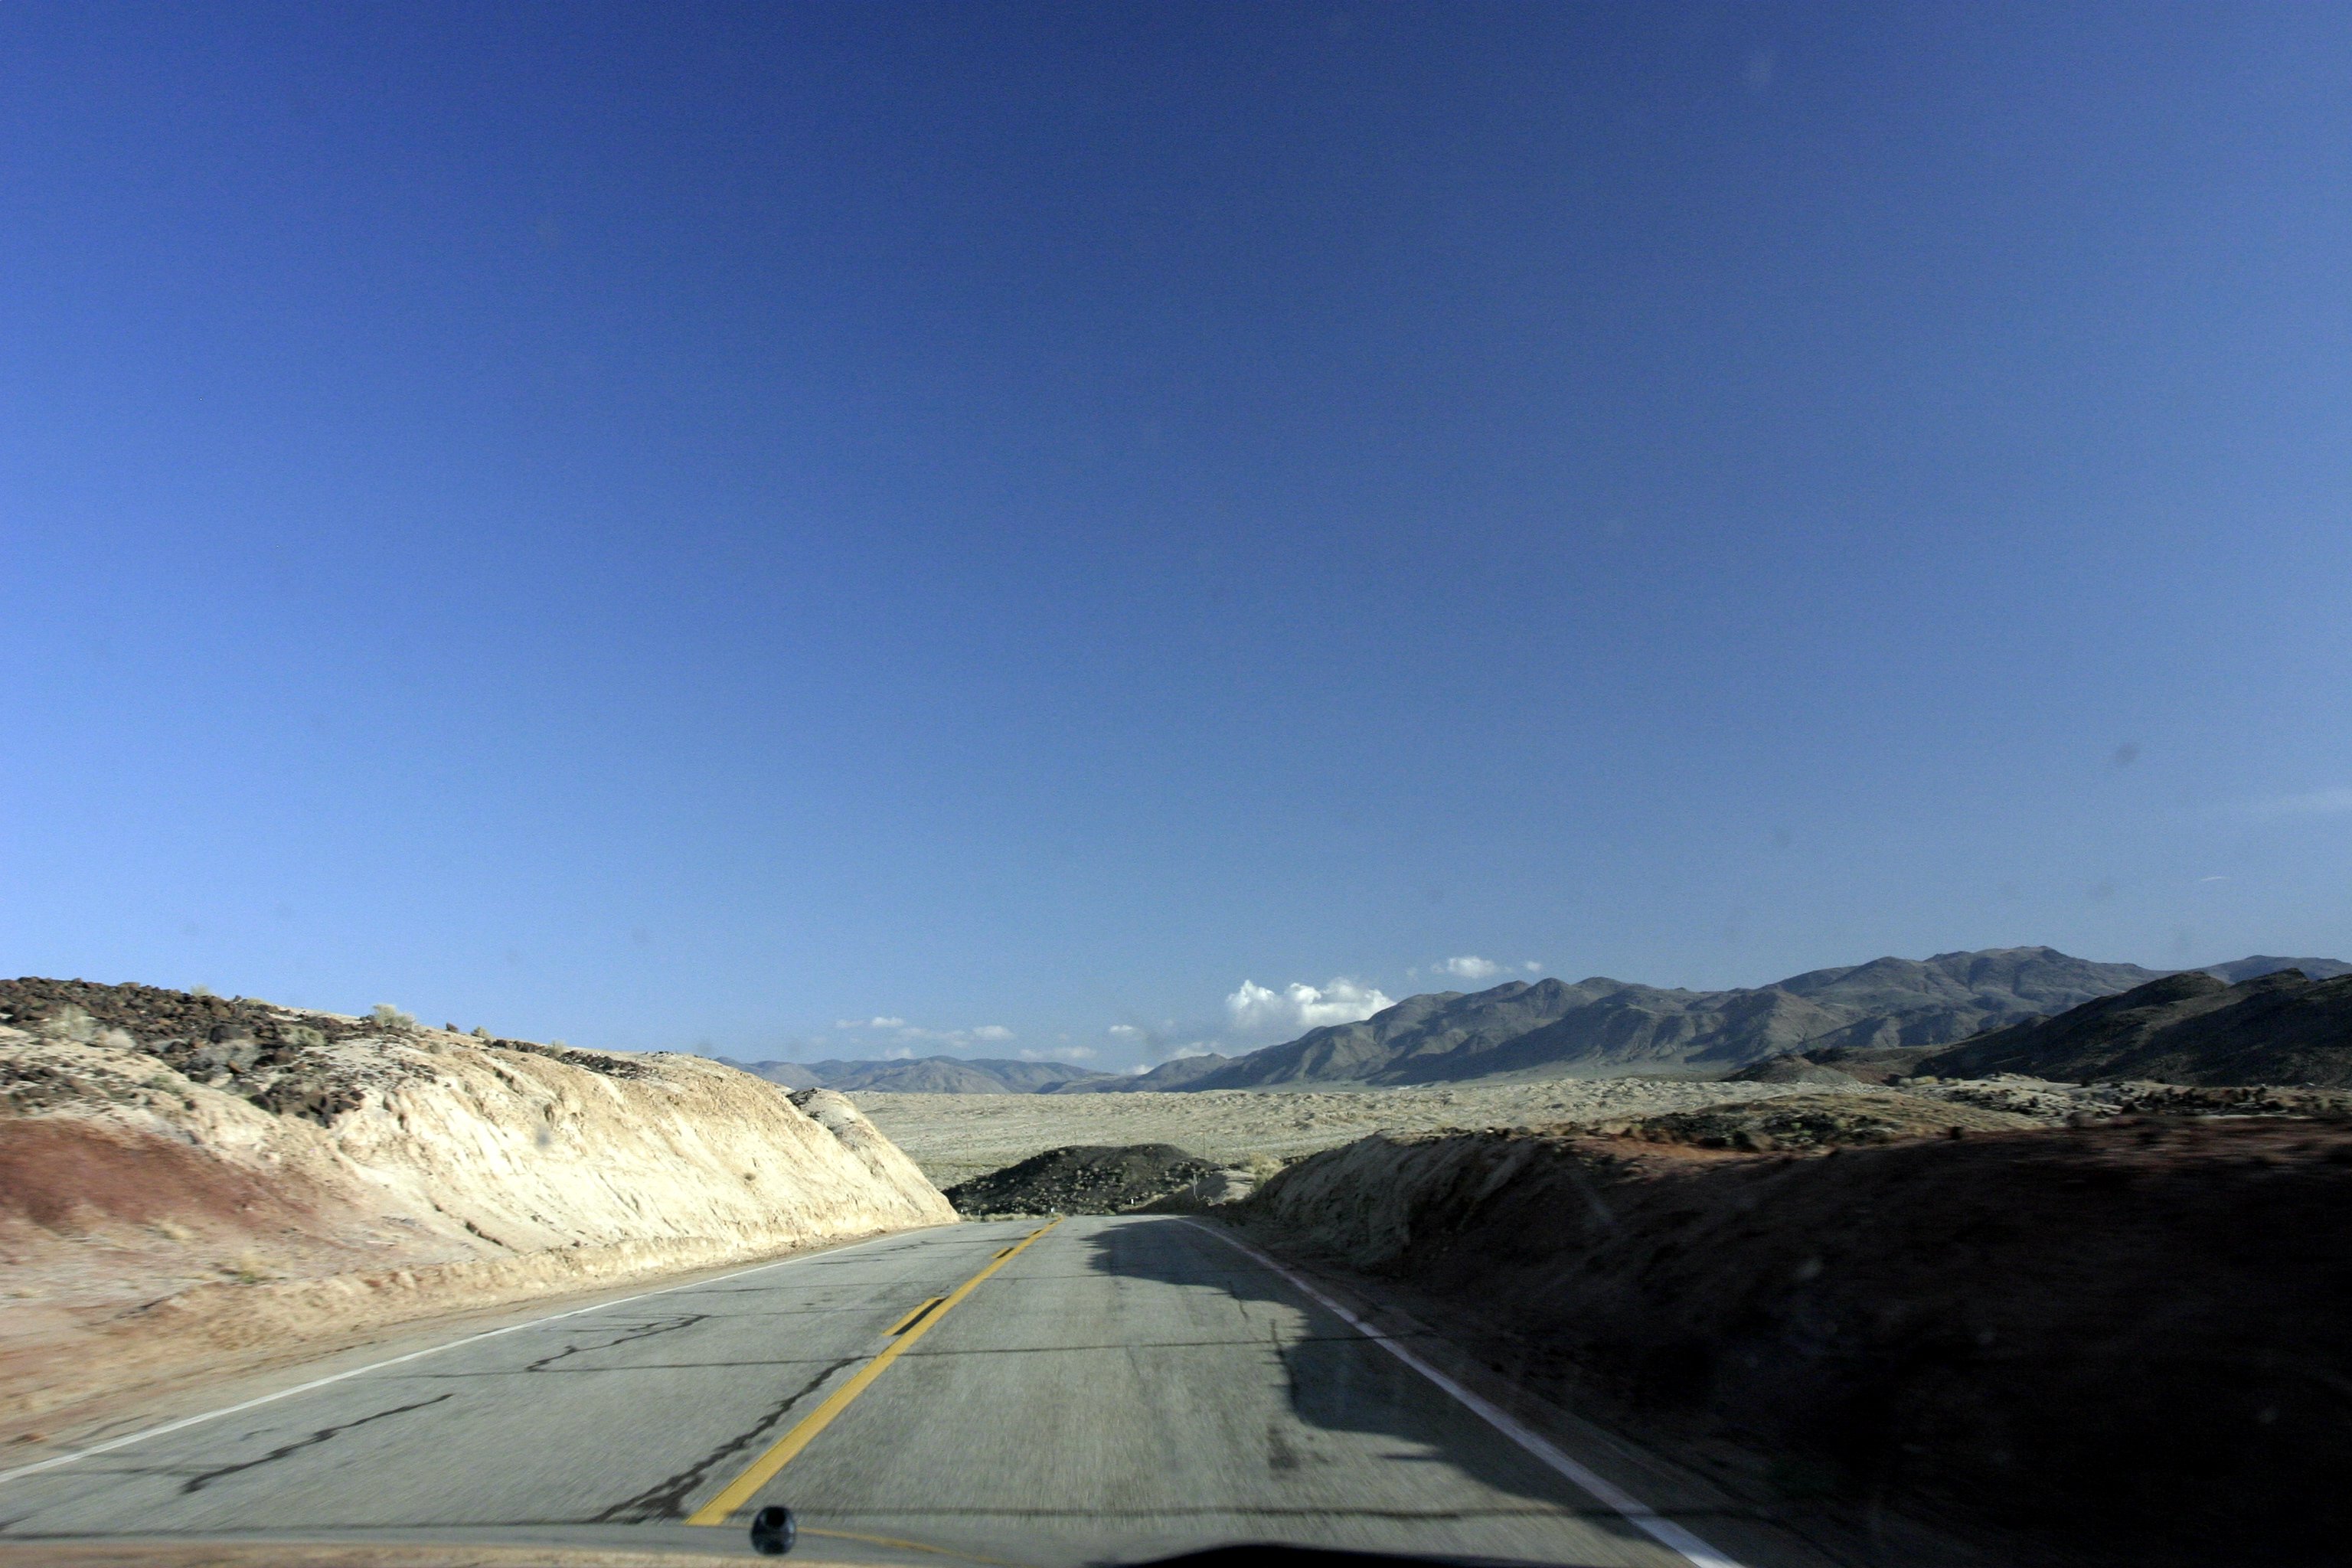 Headed to Death Valley (DR4612)